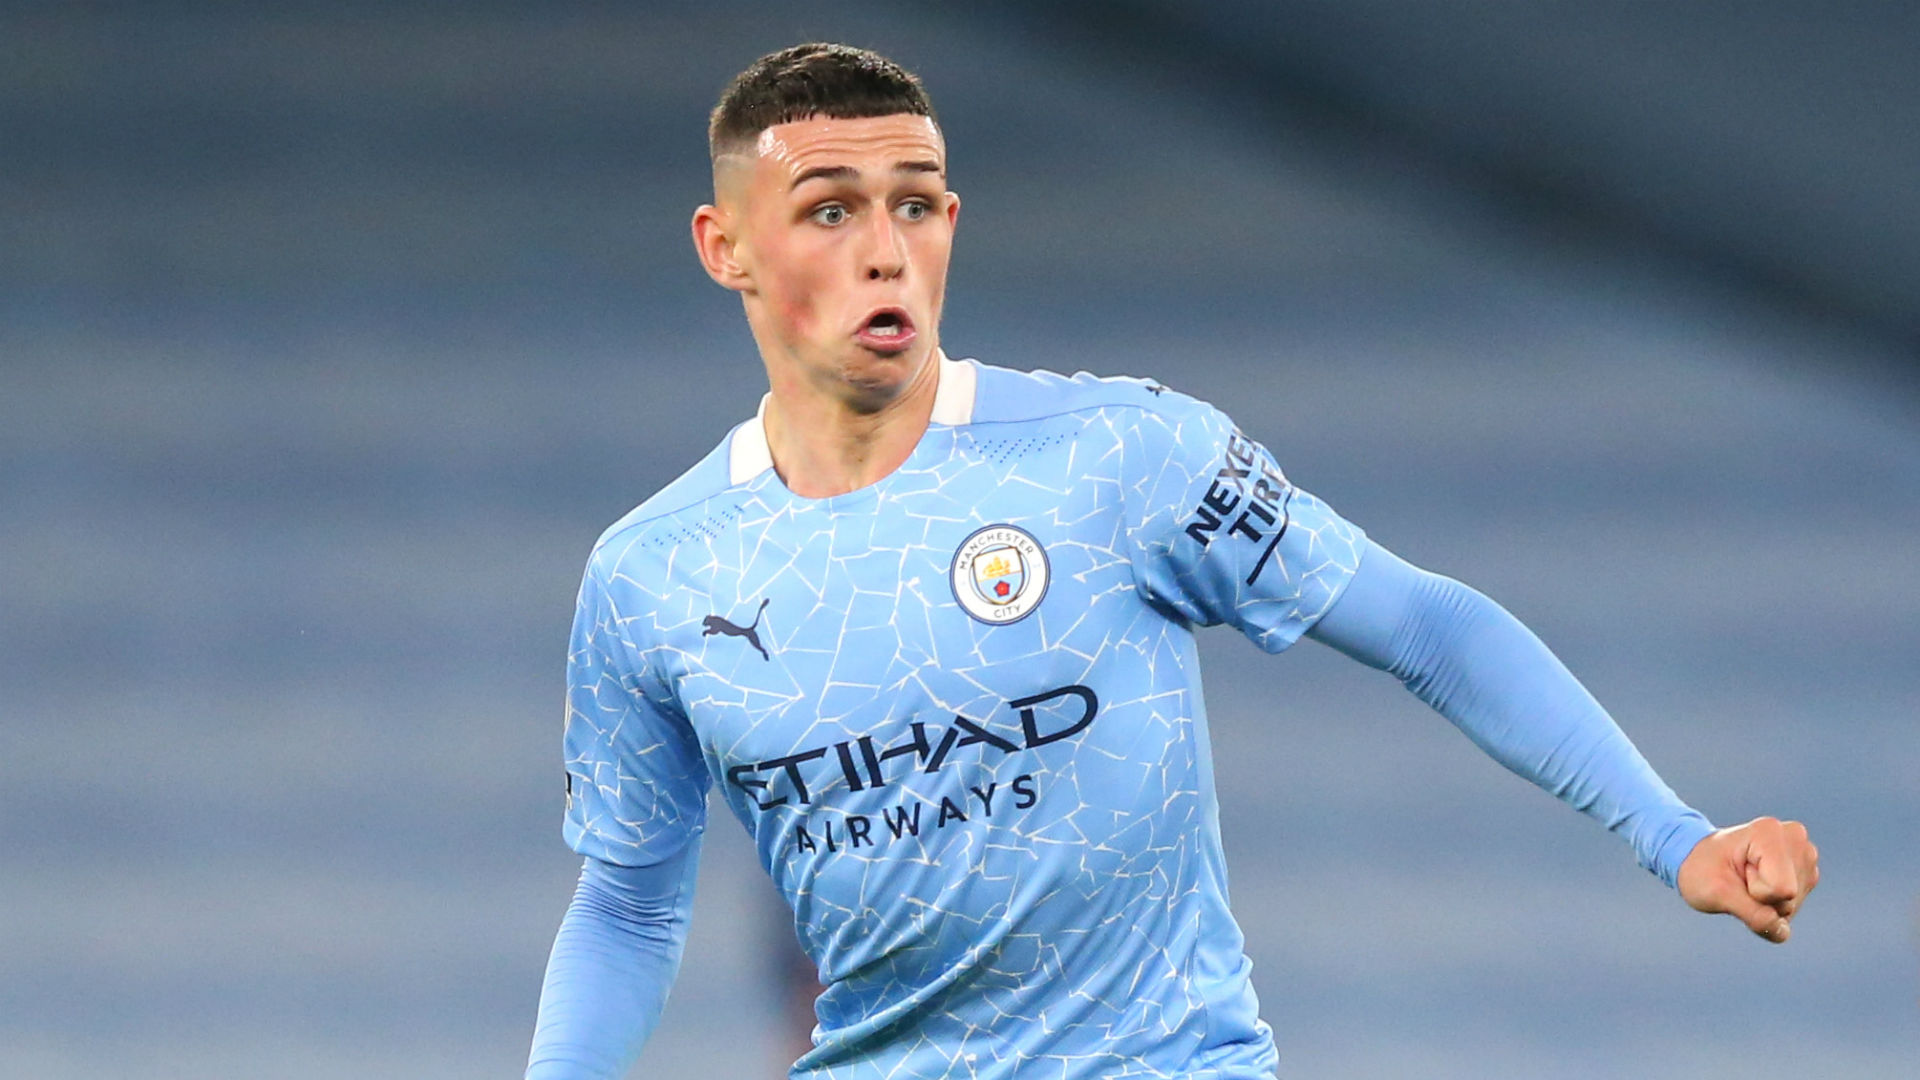  Phil Foden, a young English midfielder, playing for Manchester City.